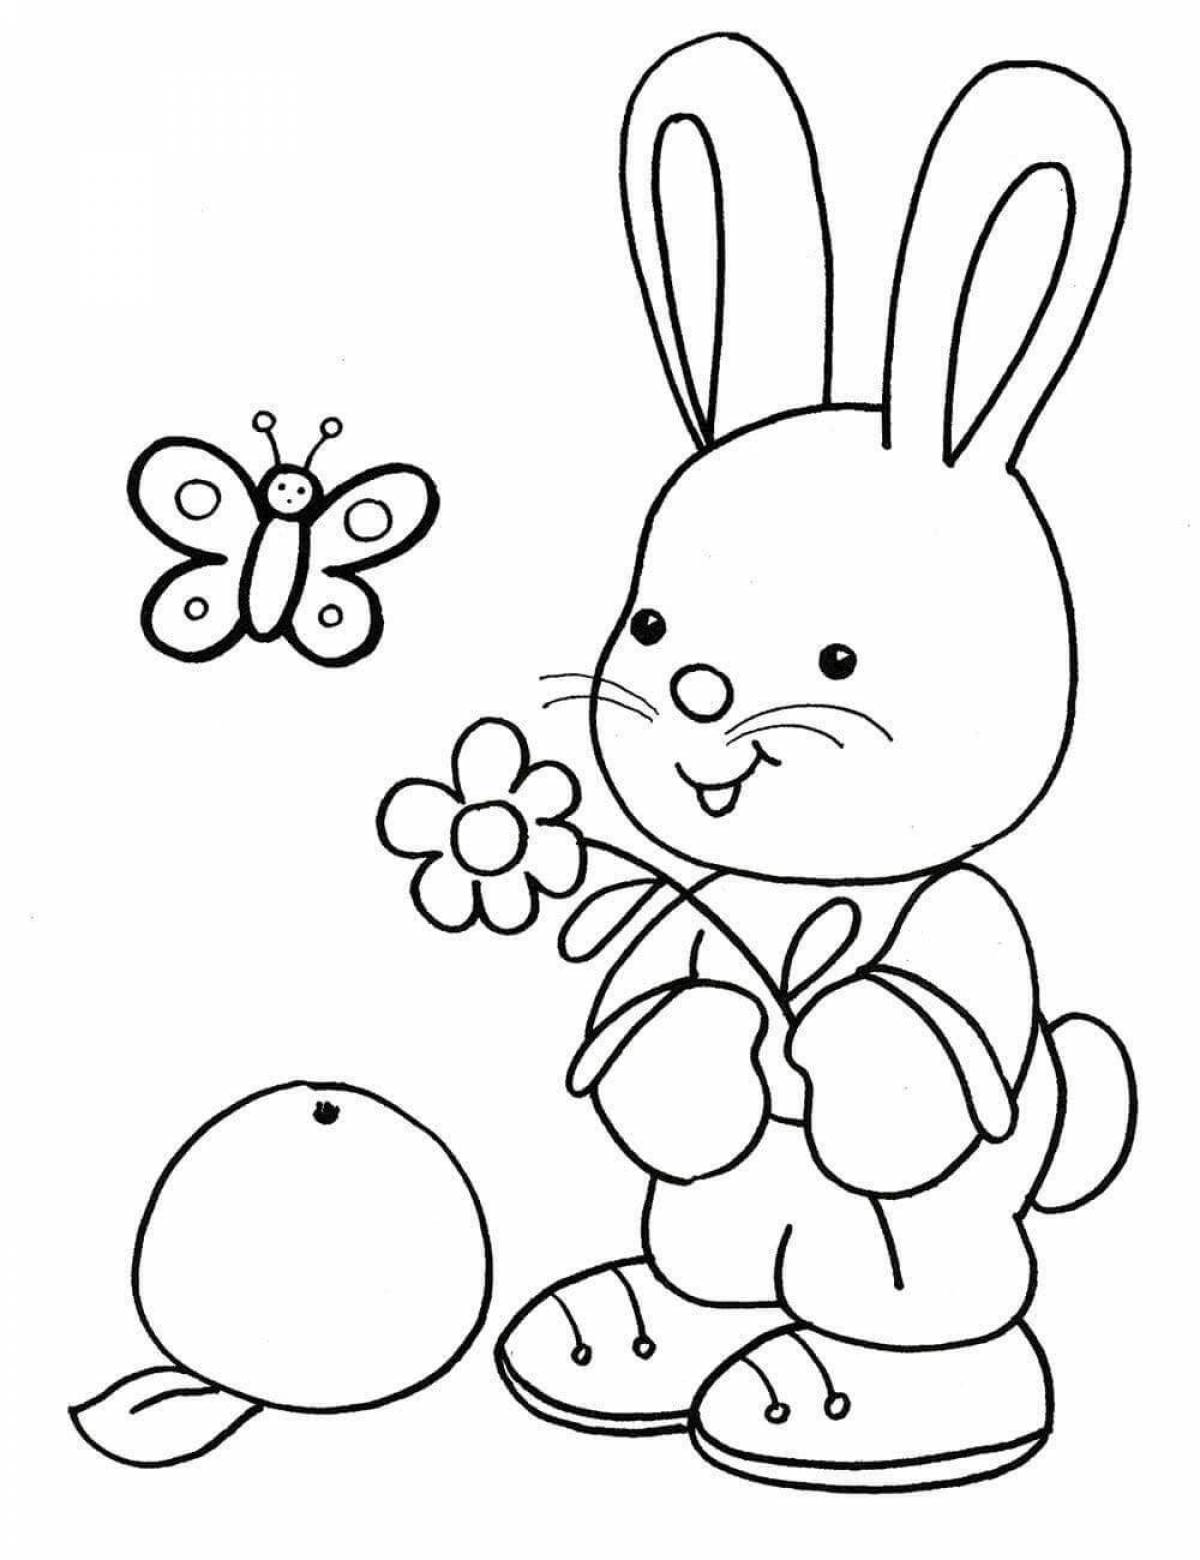 Joyful coloring book for children 3-4 years old